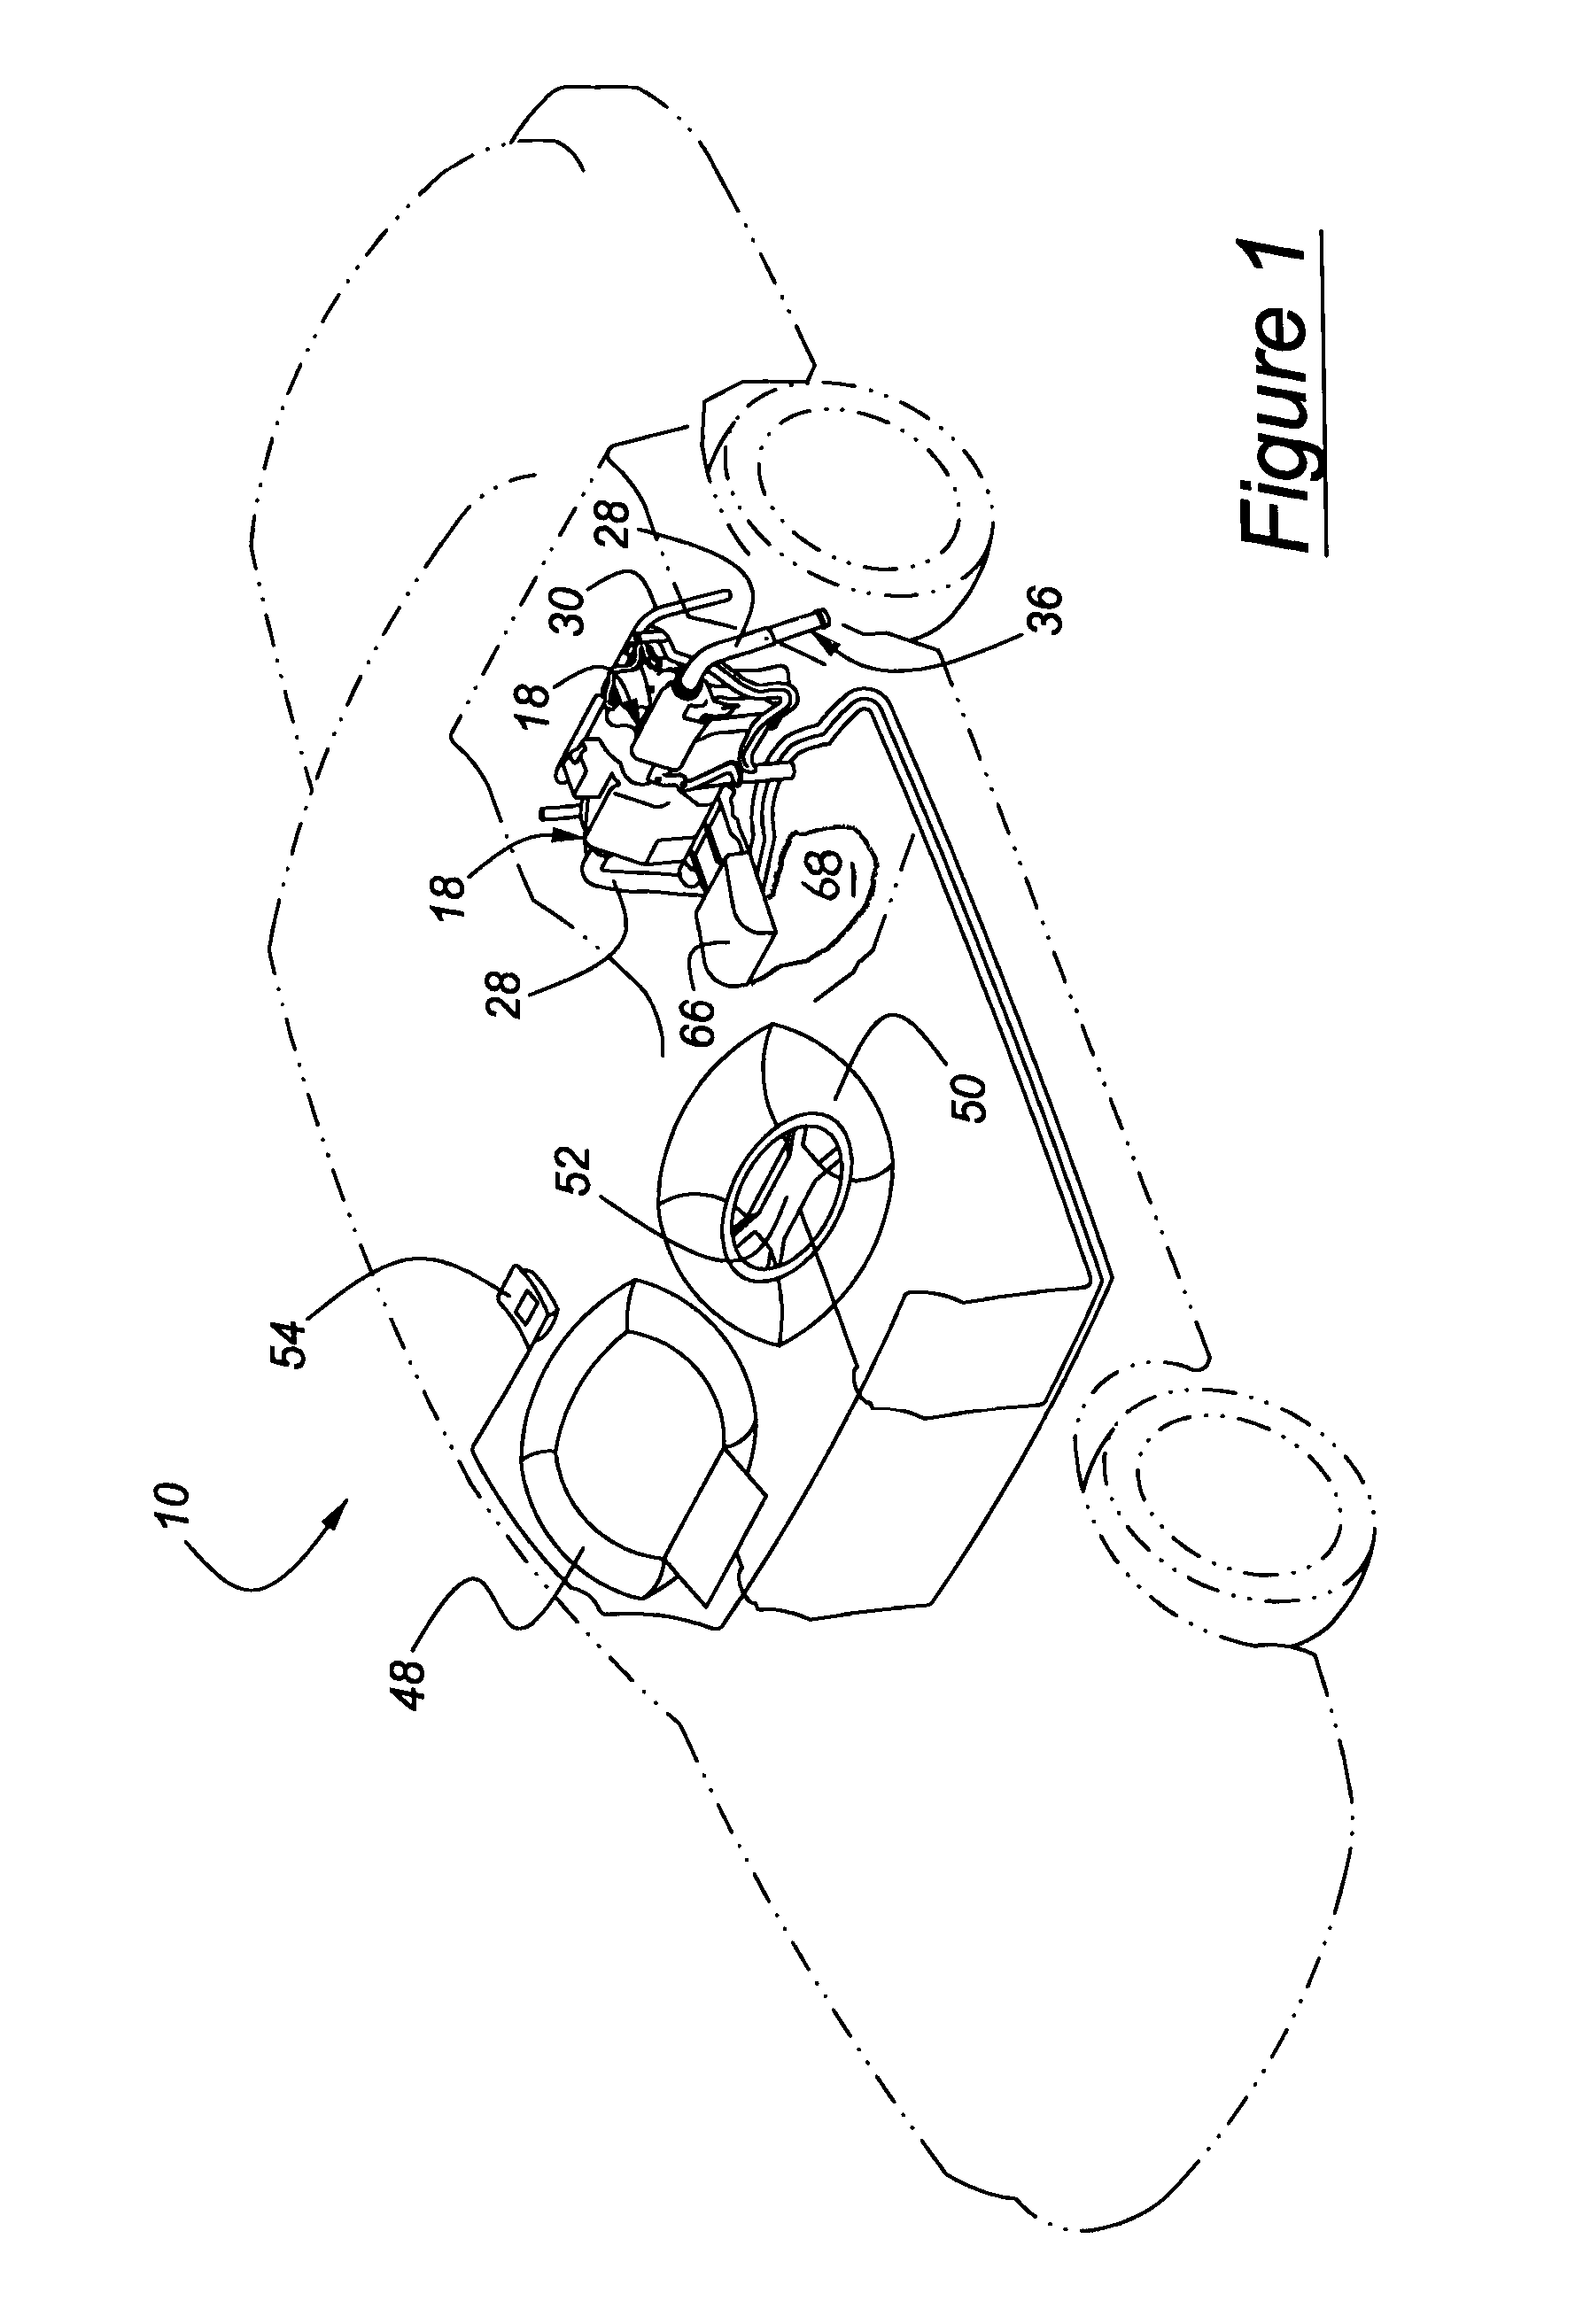 Automotive vehicle with fire suppression system